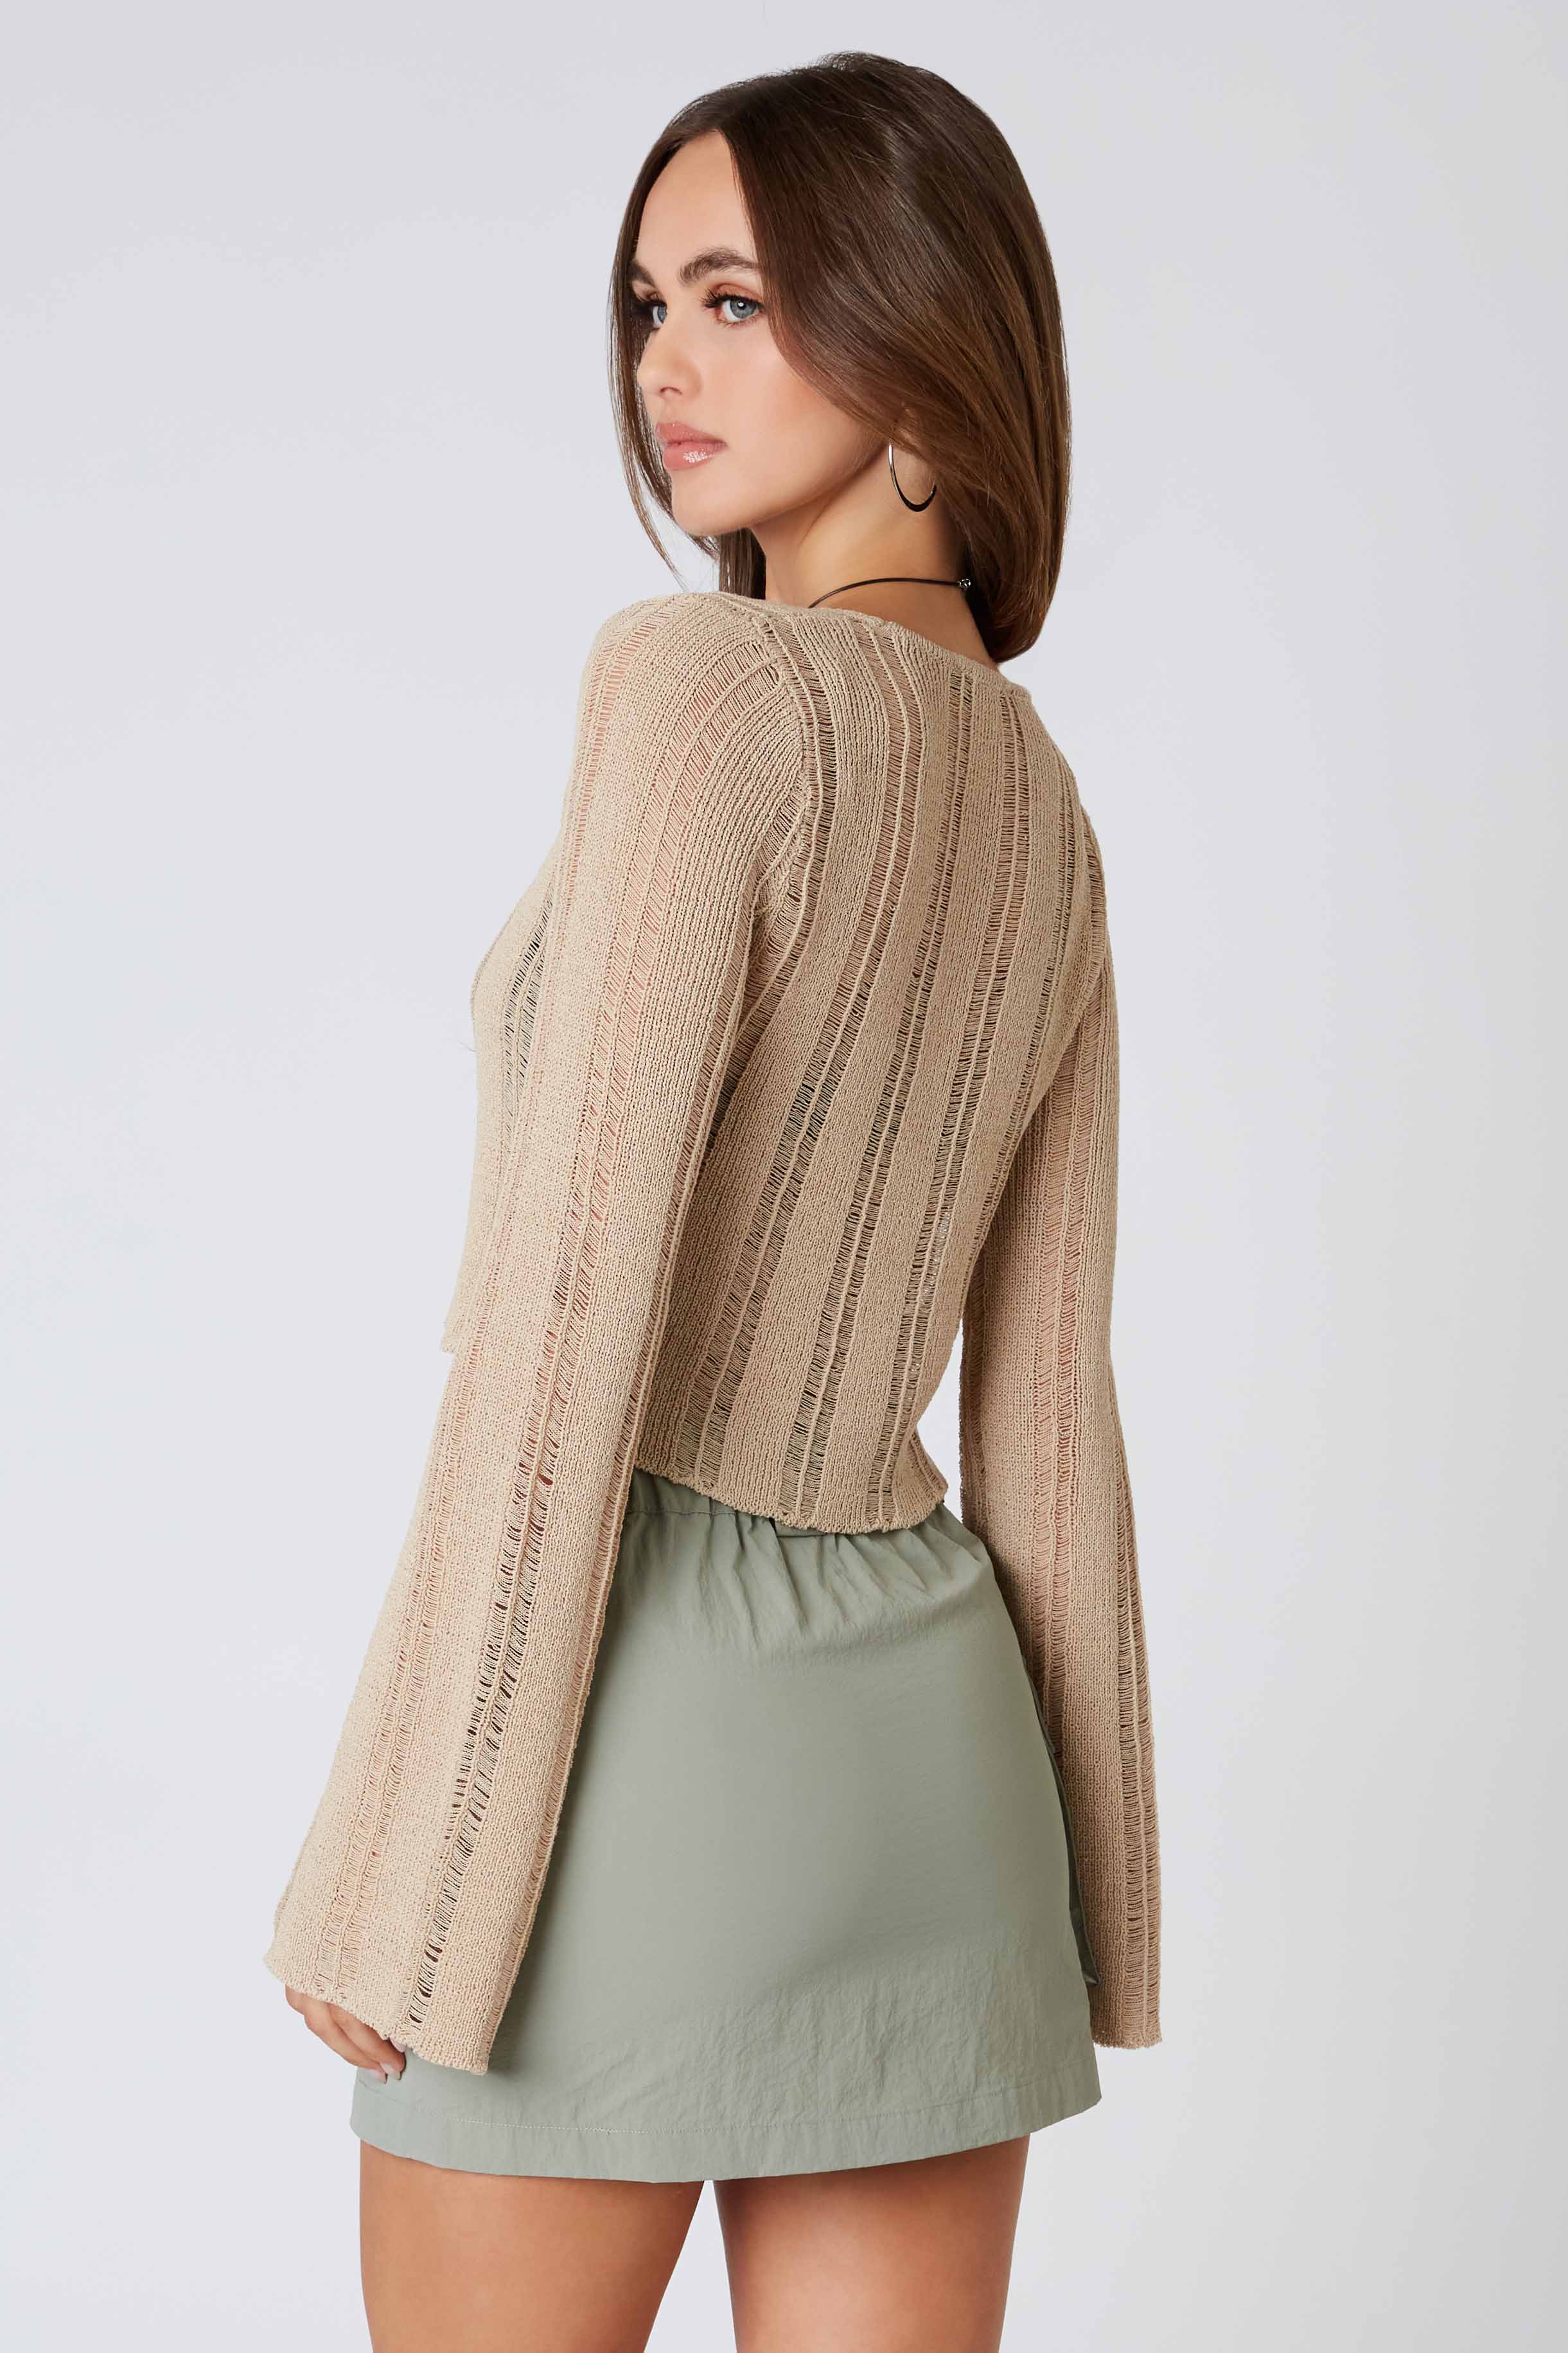 Crochet Knit Bell Sleeve Cardigan in Taupe Back View